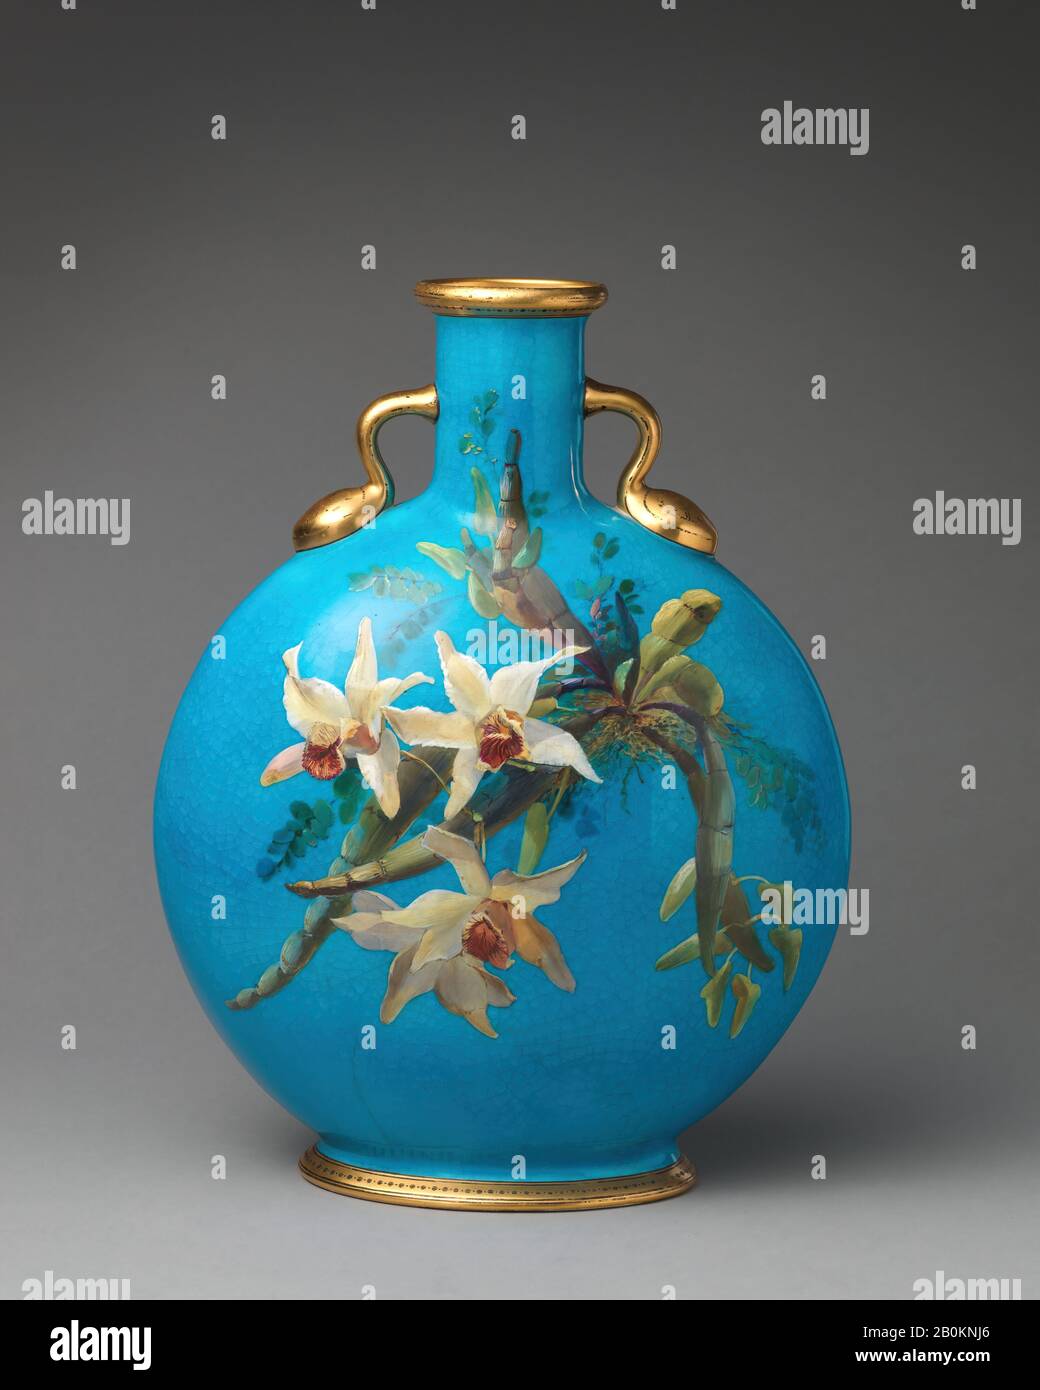 Minton(s), Moon flask with orchids, British, Stoke-on-Trent, Staffordshire, Minton(s) (British, Stoke-on-Trent, 1793–present), ca. 1872, British, Stoke-on-Trent, Staffordshire, Bone china, confirmed: 12 3/8 × 9 1/2 × 5 1/16 in. (31.4 × 24.1 × 12.9 cm), Ceramics-Porcelain Stock Photo